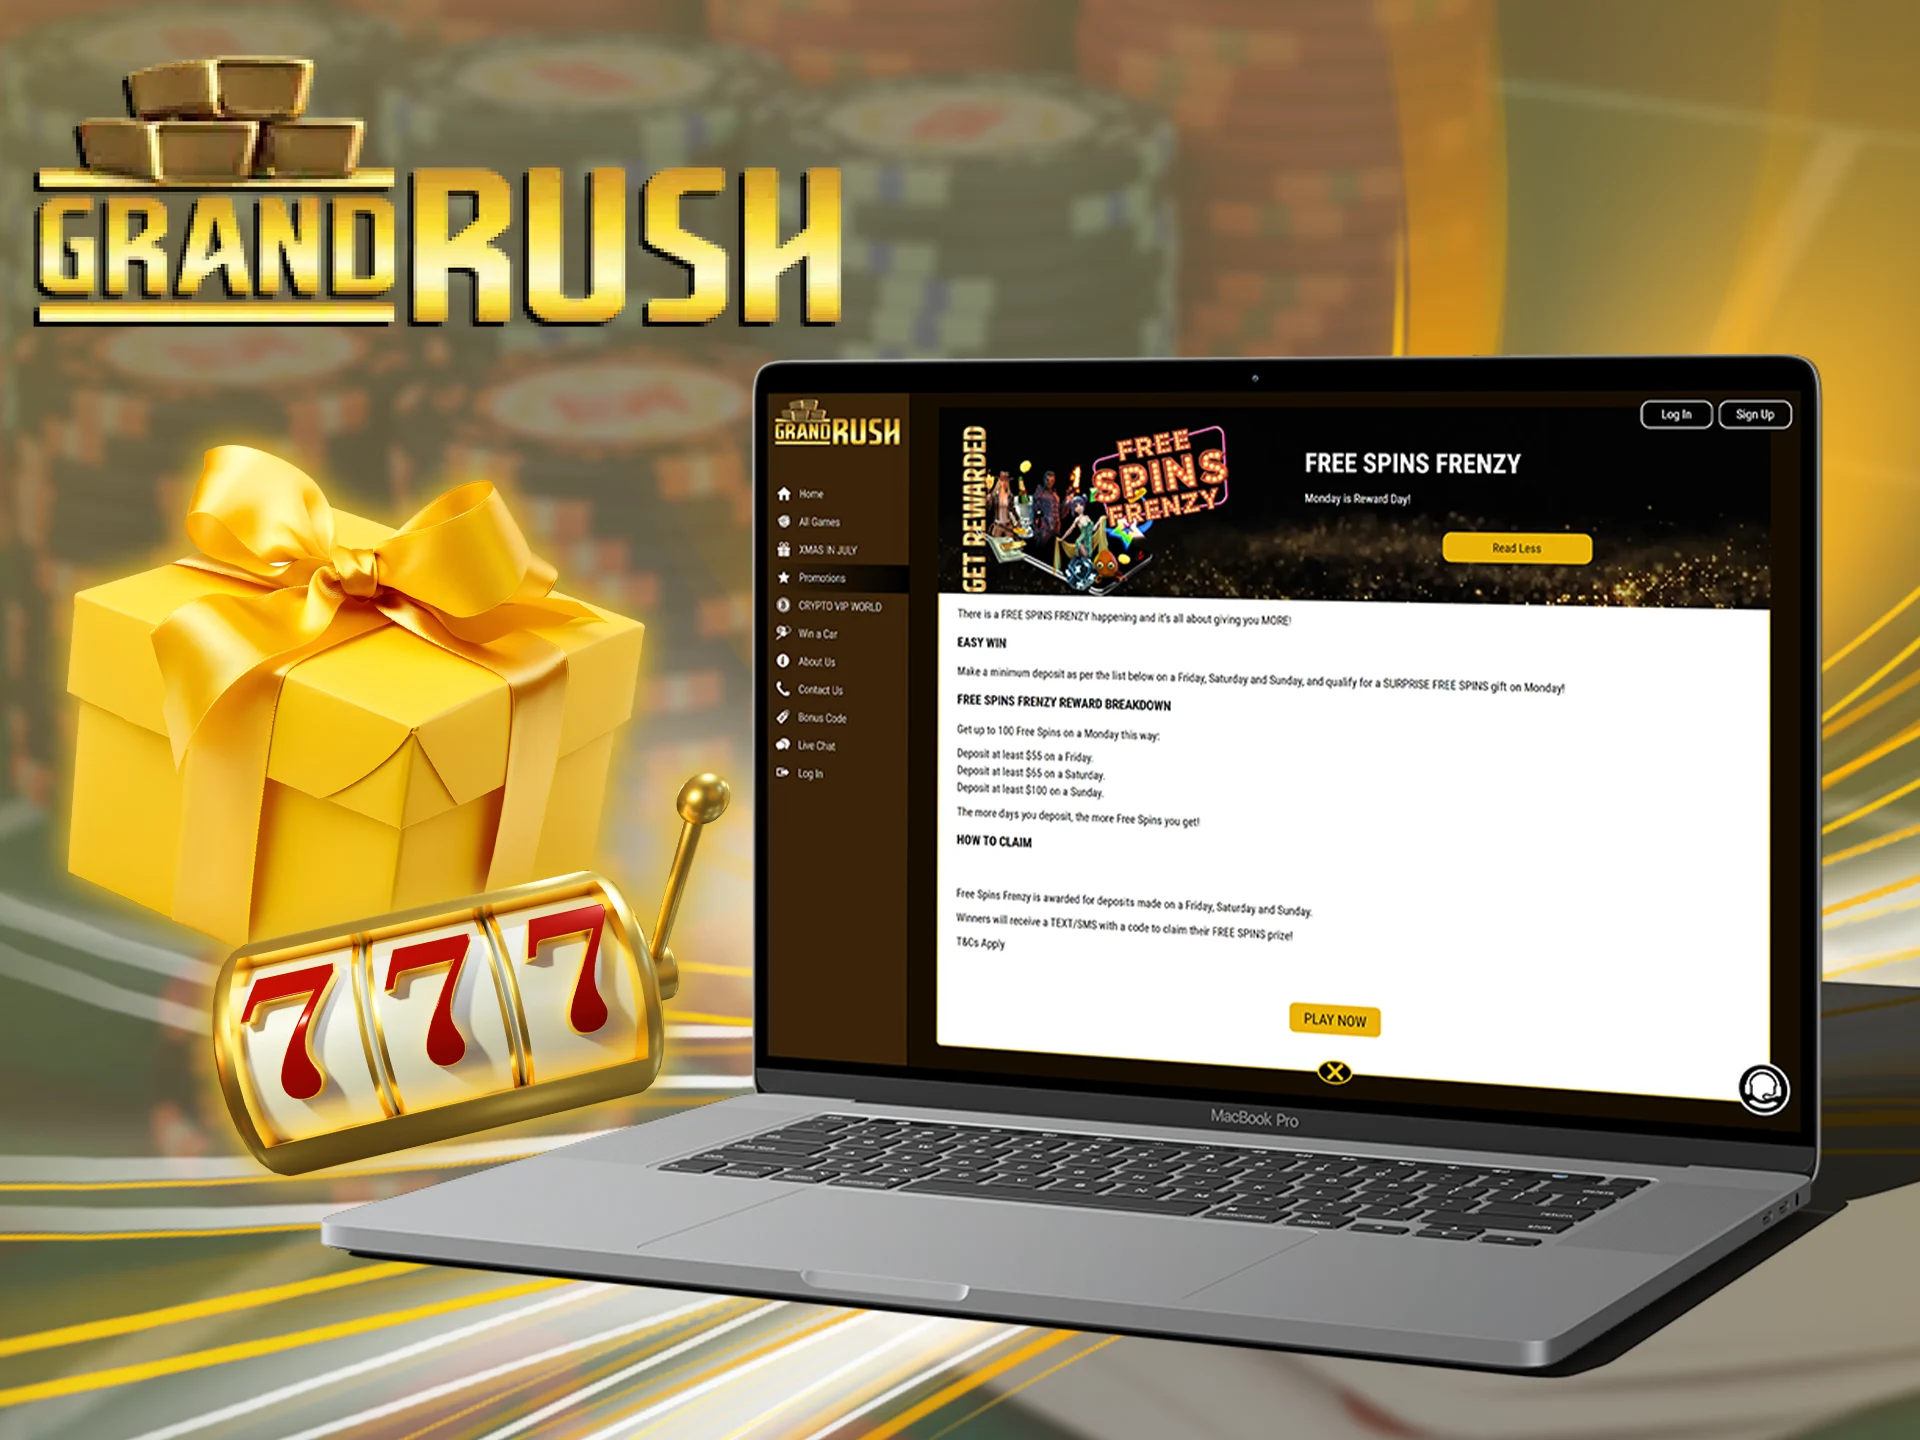 Fund your Grand Rush account over the weekend and spin the reels for free.